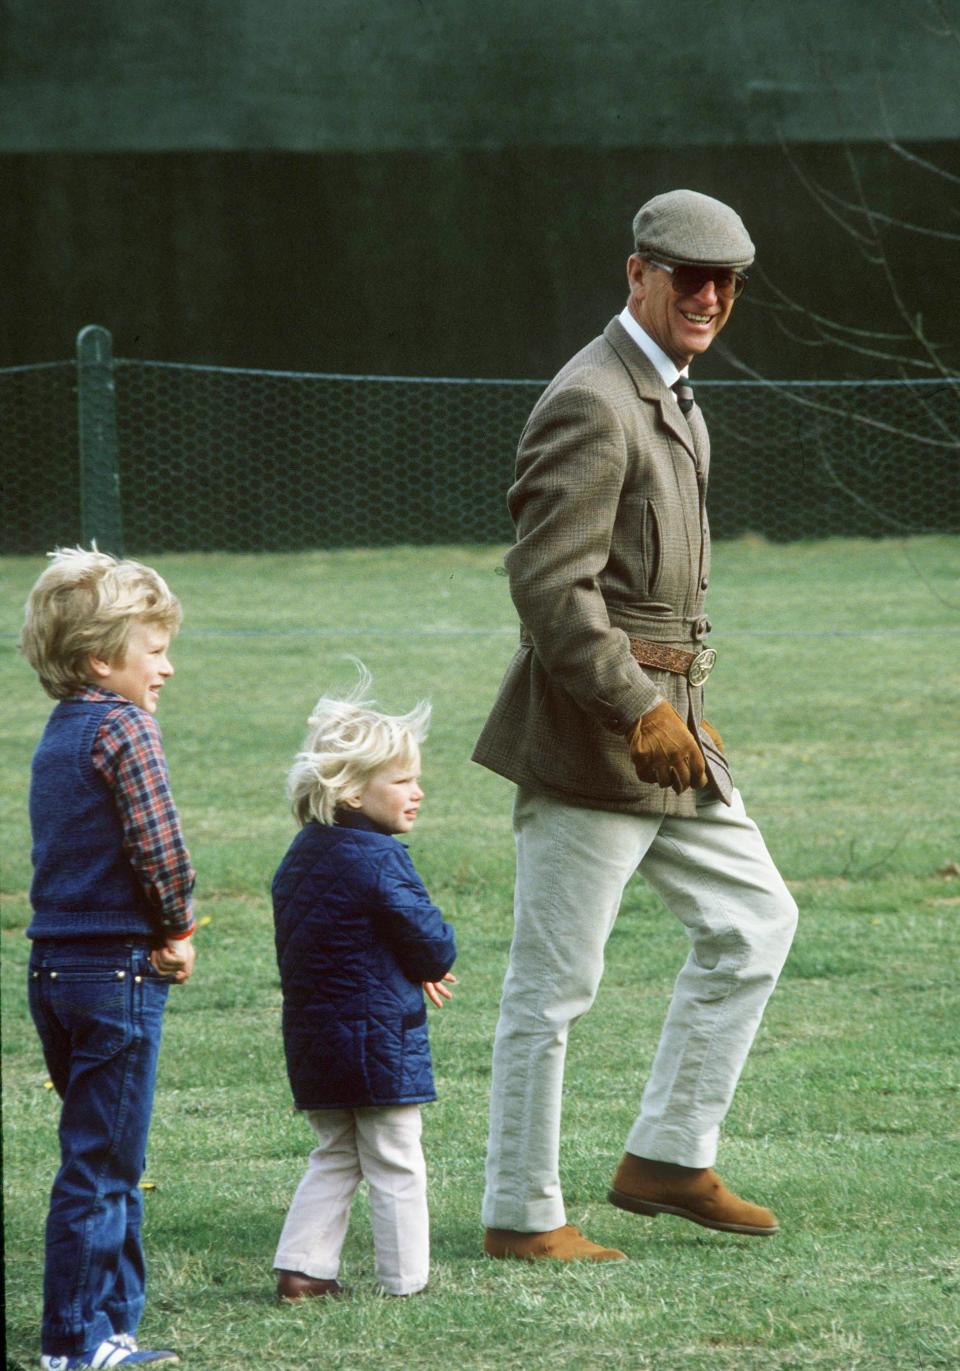 Prince Philip, Duke of Edinburgh: A Life in Pictures